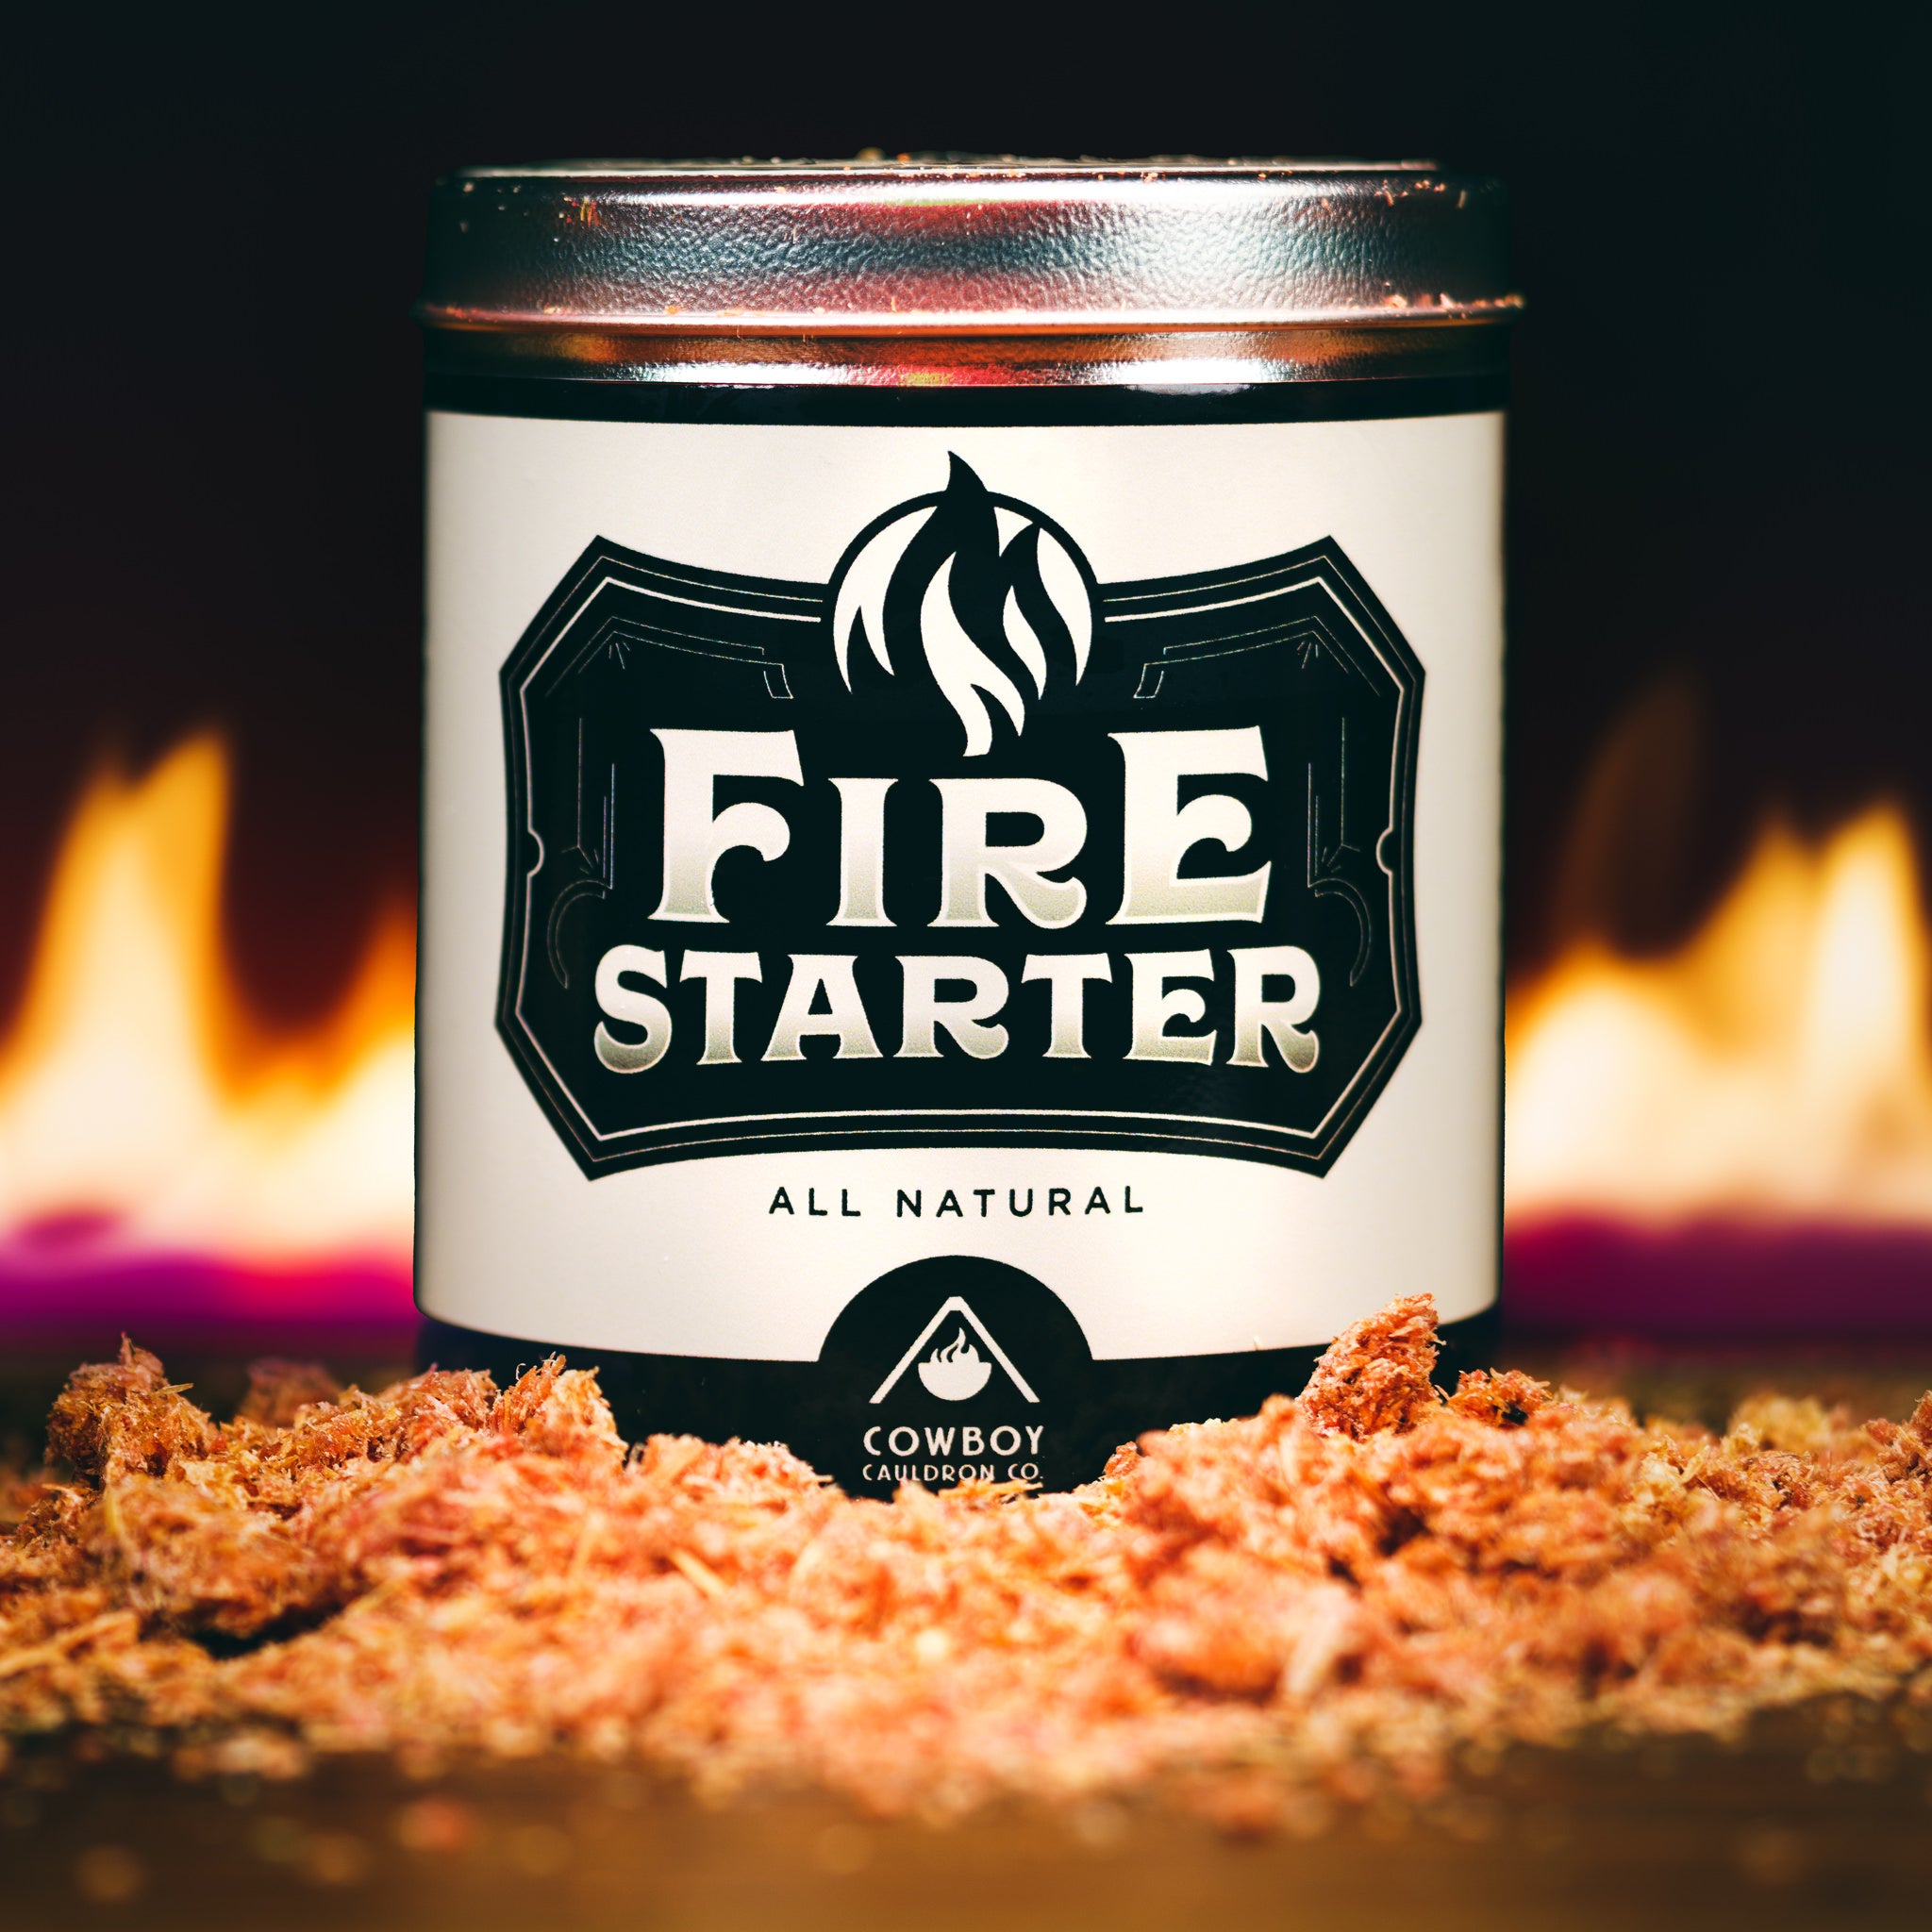 Natural Soy Wax Fire Starters – The Cranky Cauldron